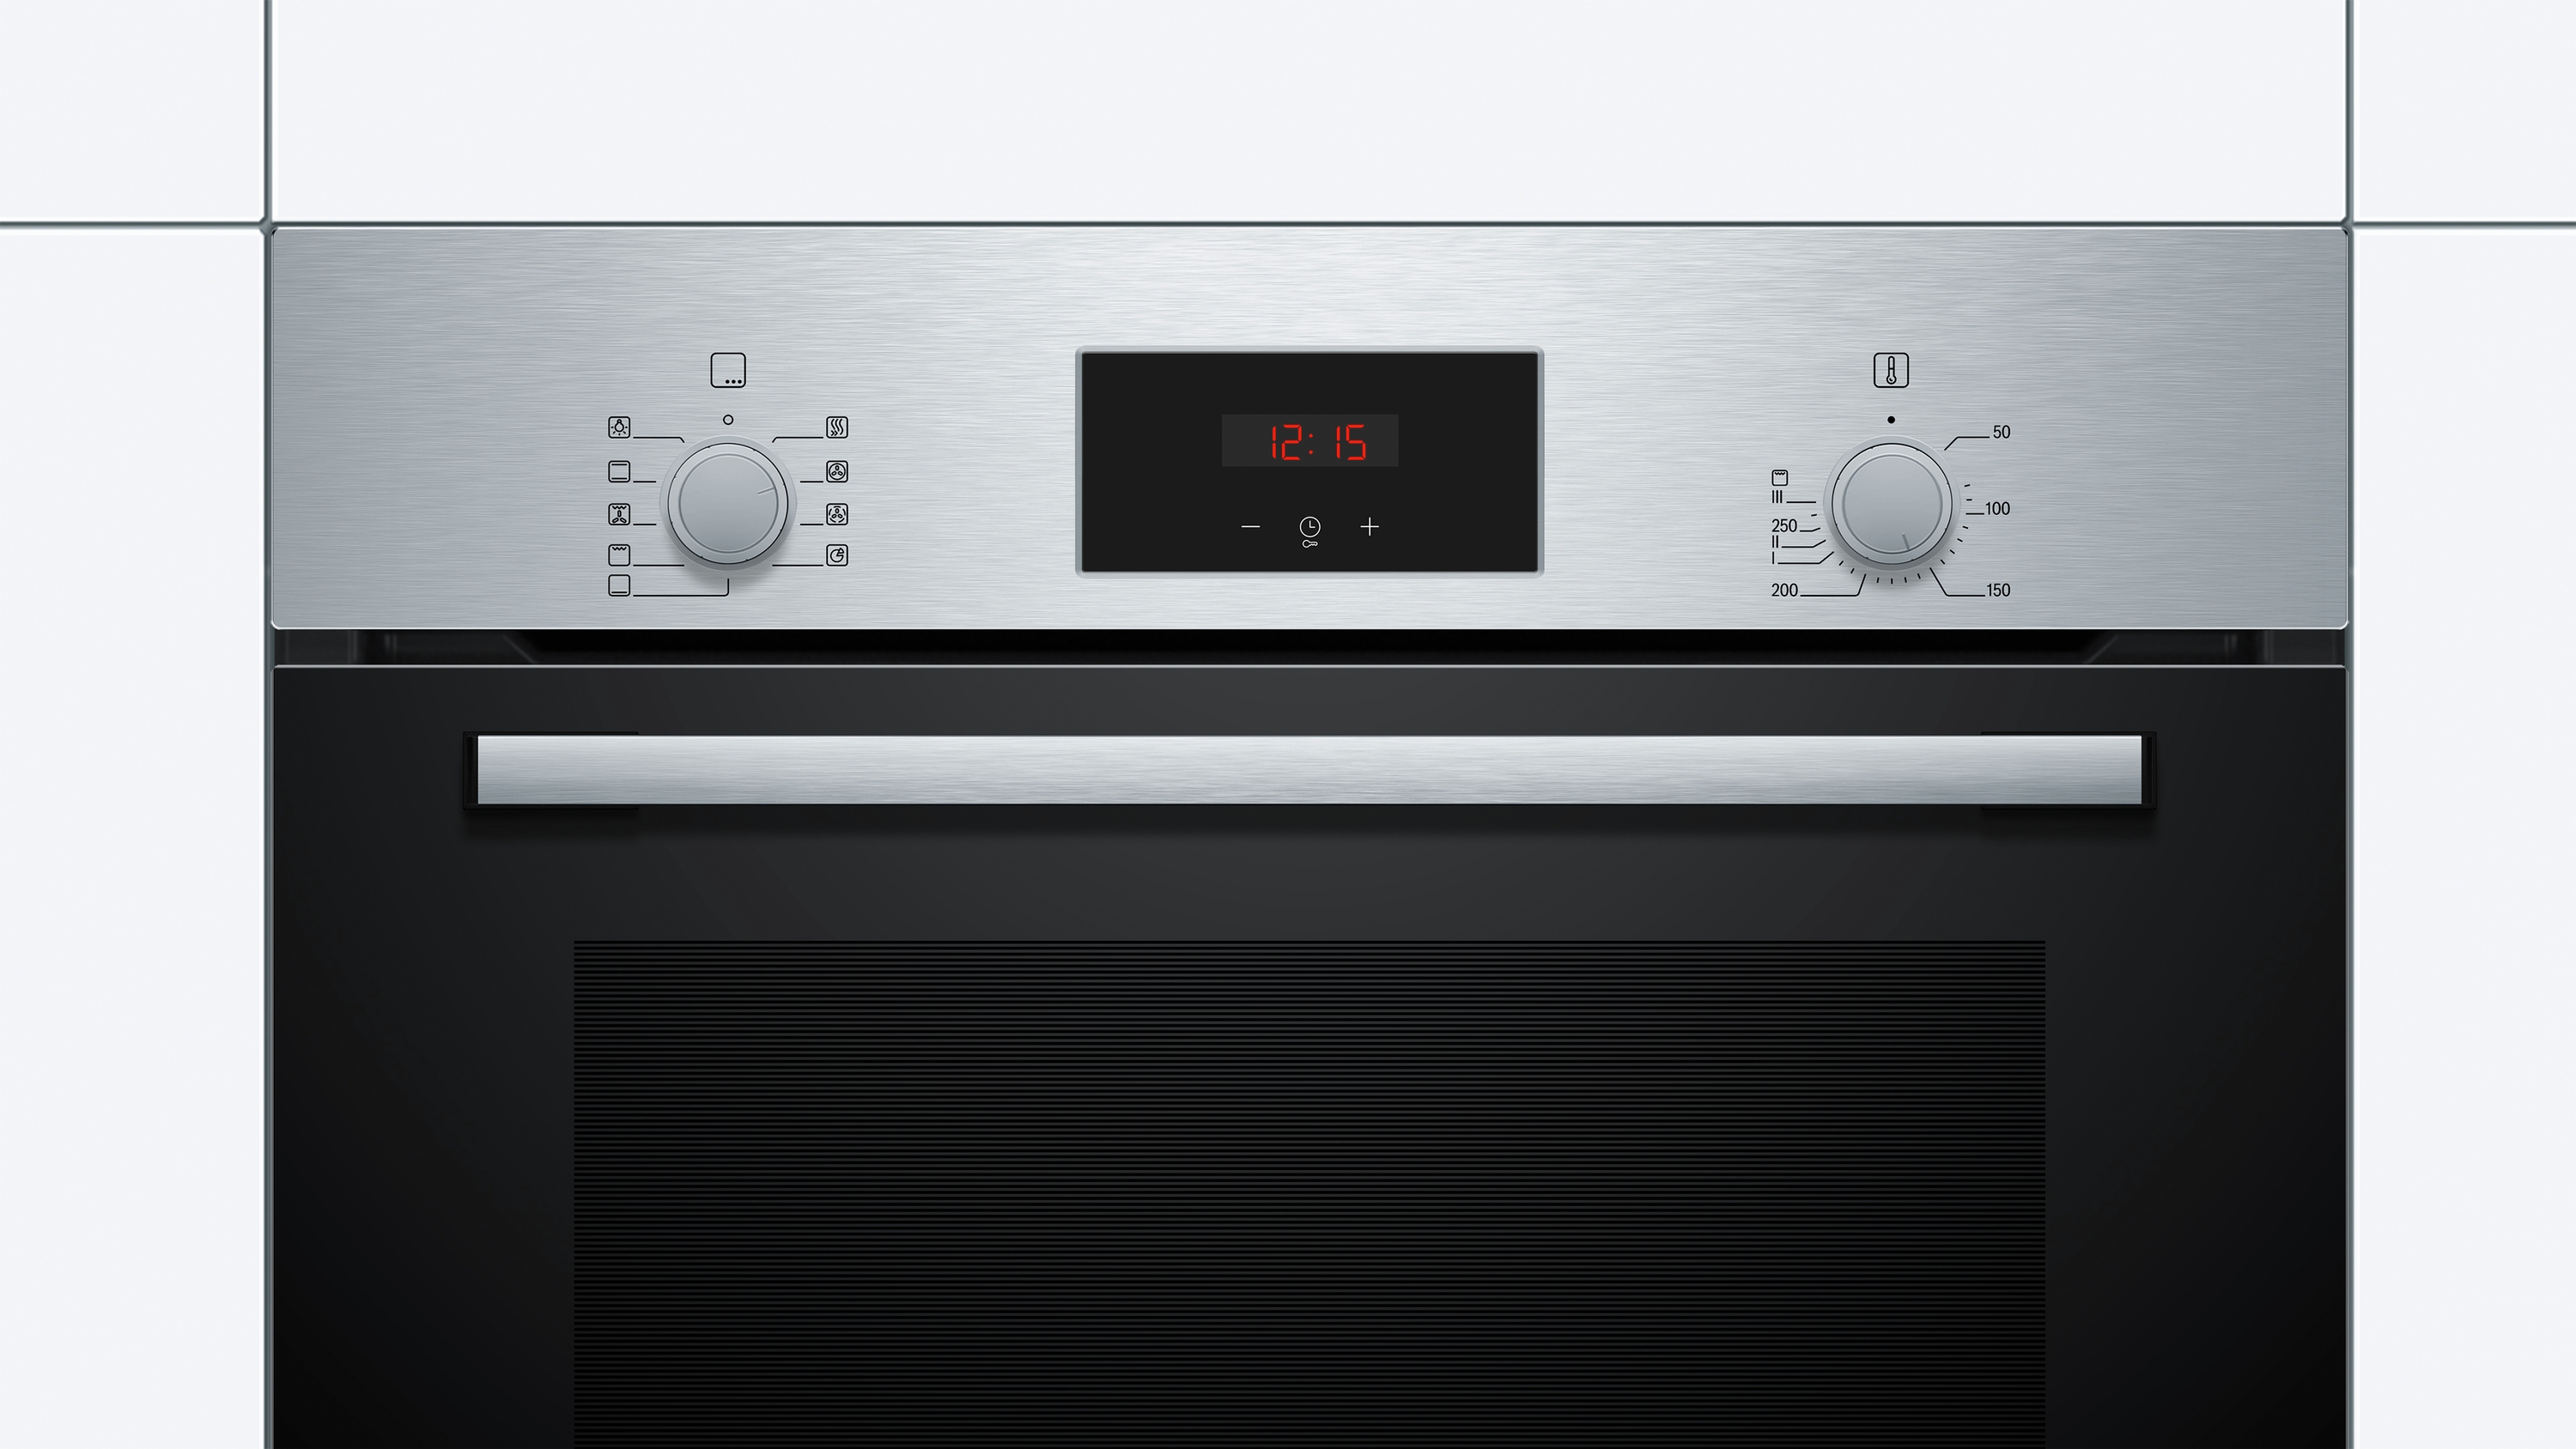 Series 2, Built-in oven, 60 x 60 cm, Stainless steel, HBF114BS1